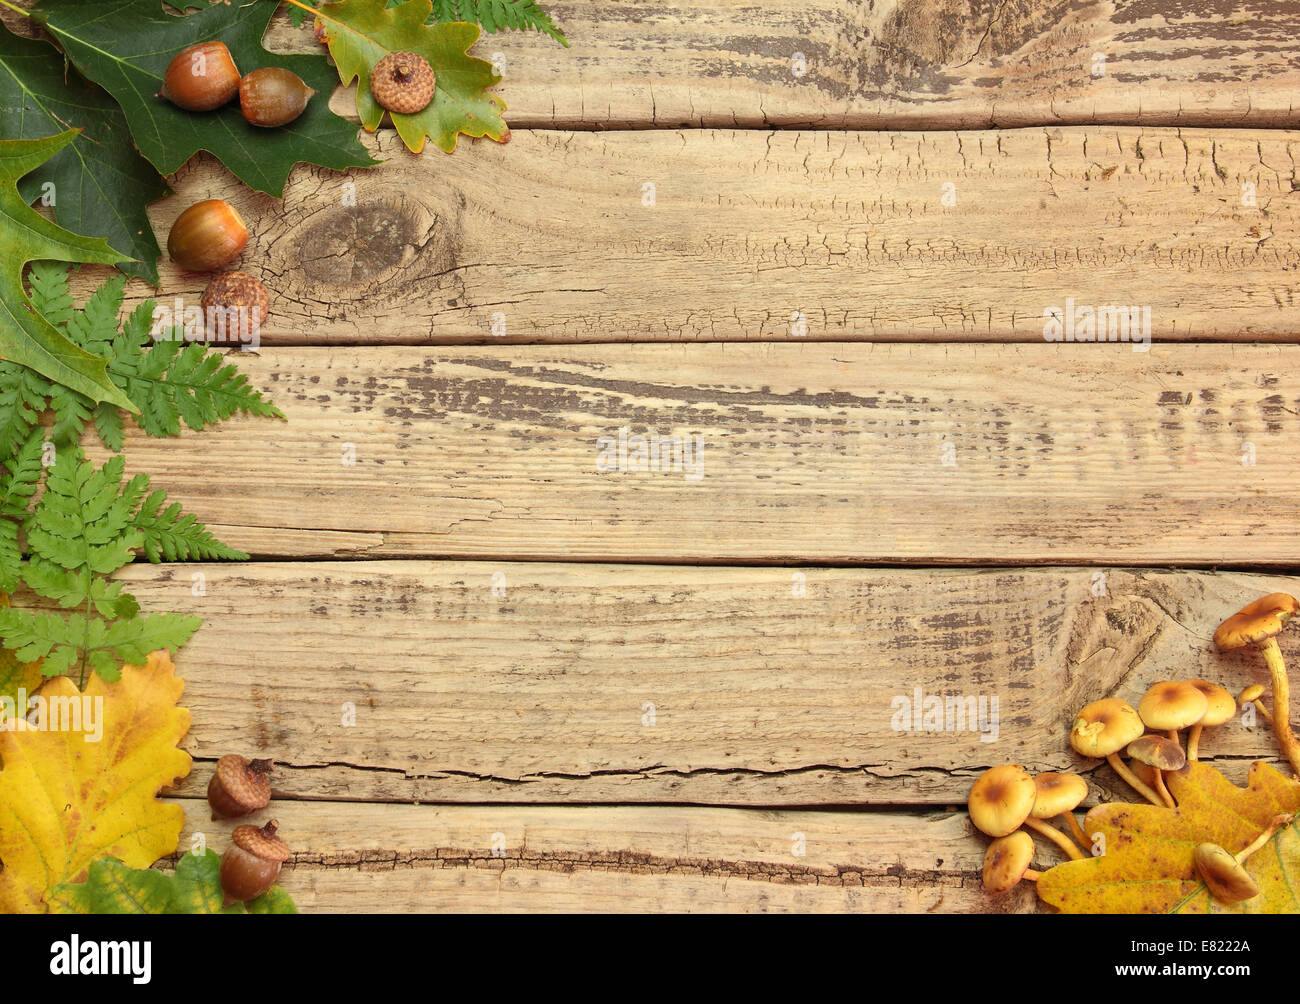 Autumn background with color leafs on wooden board Stock Photo